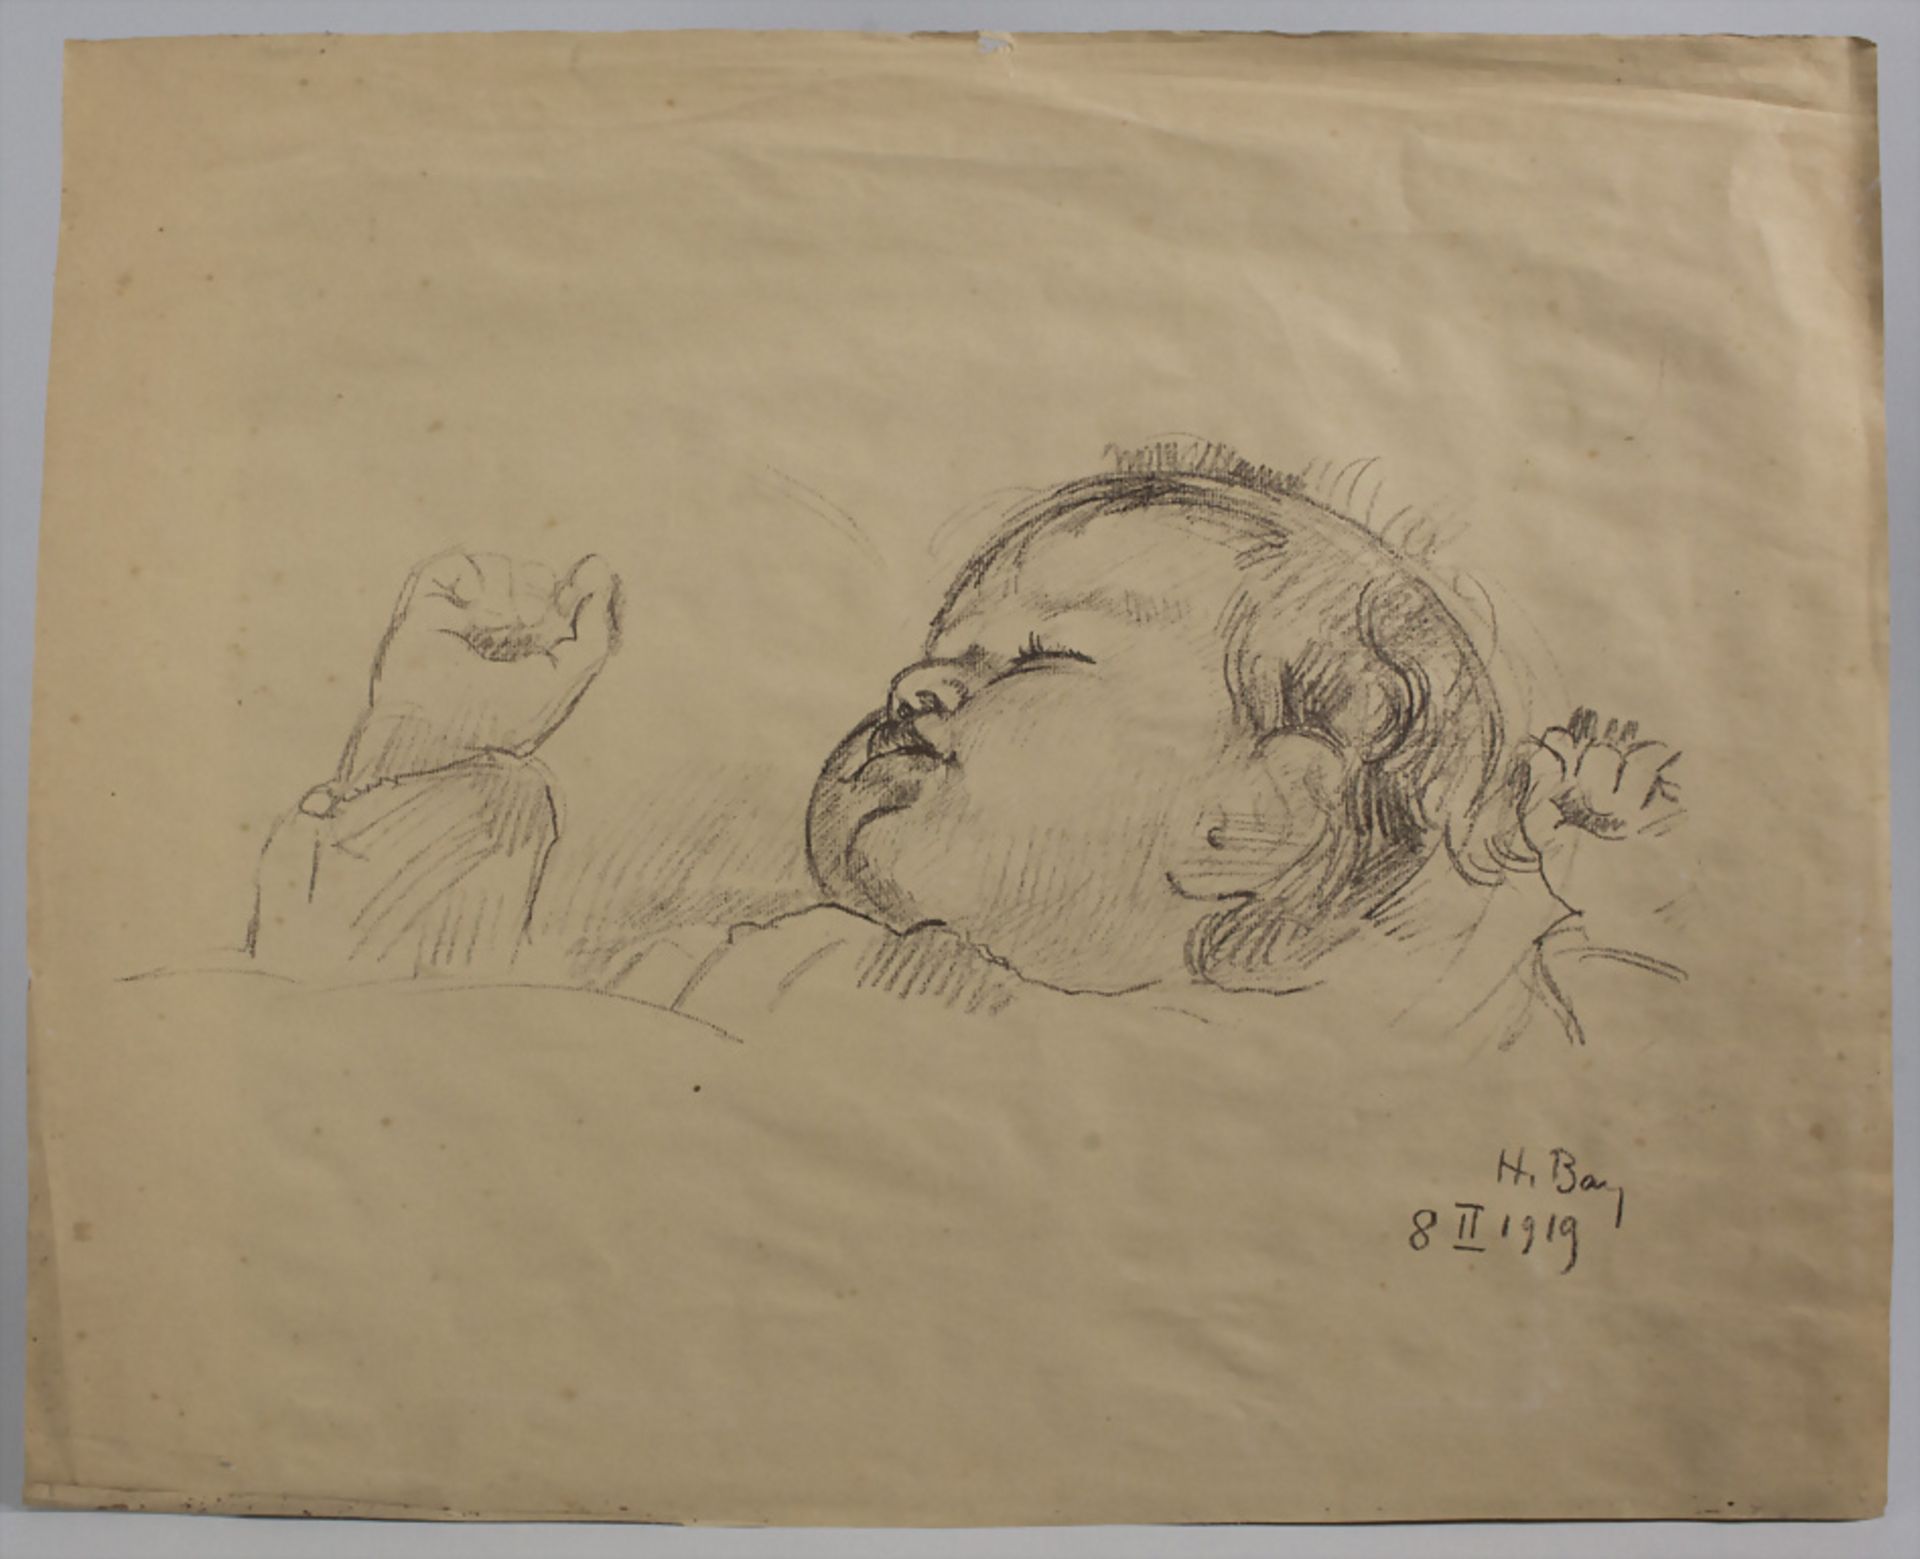 Hanni Bay (1885-1978), 'Schlafendes Baby' / 'A sleeping baby', 1919 - Image 2 of 4